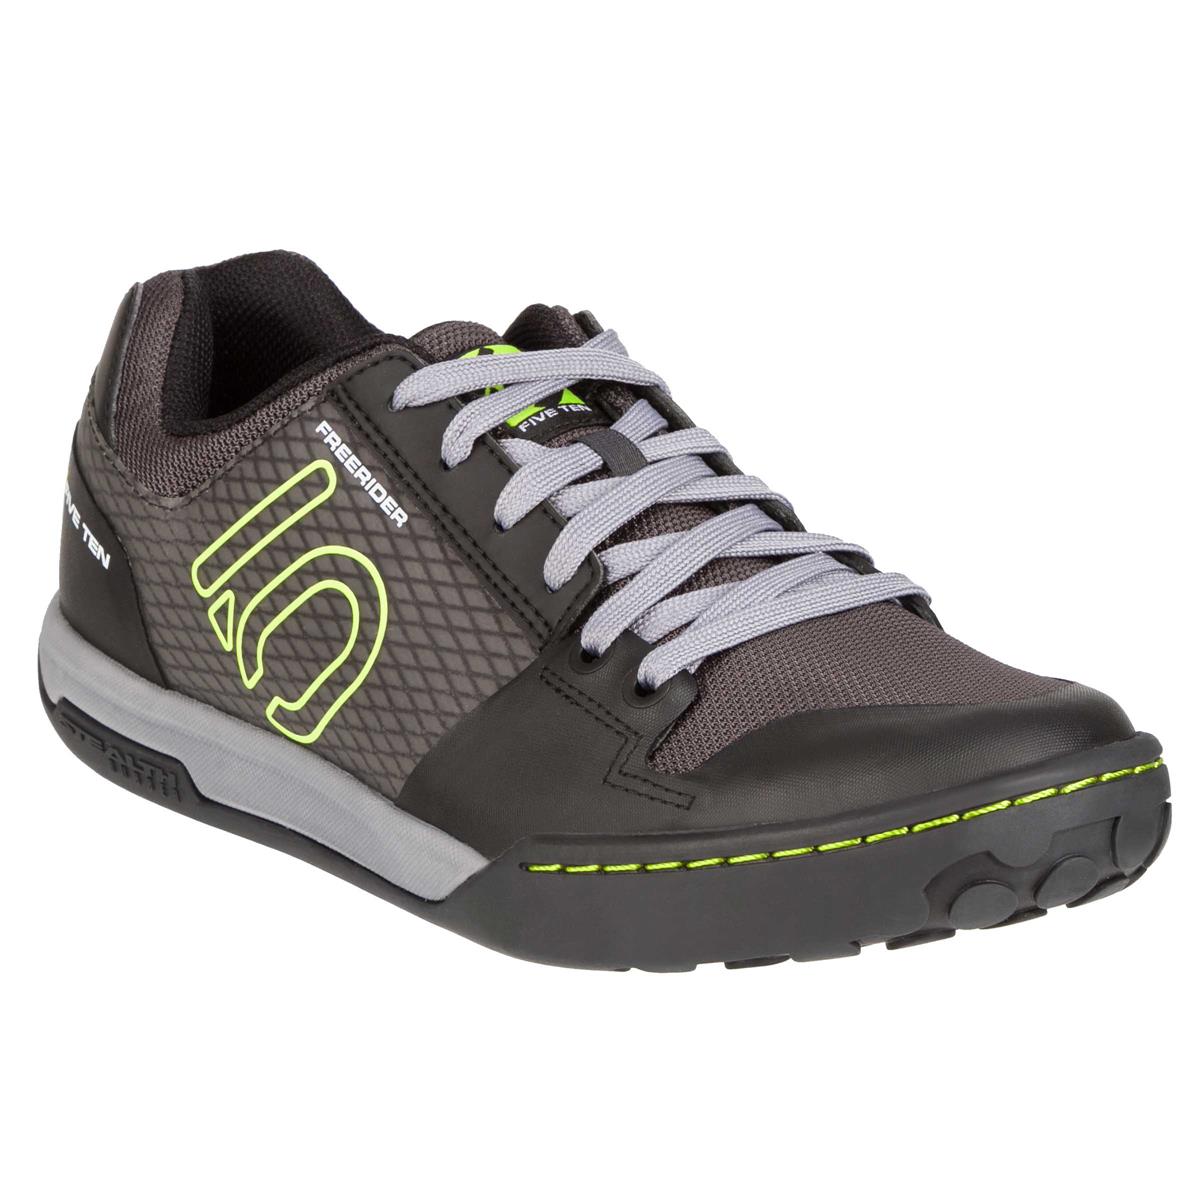 Five Ten Chaussures VTT Freerider Contact Black/Lime Punch